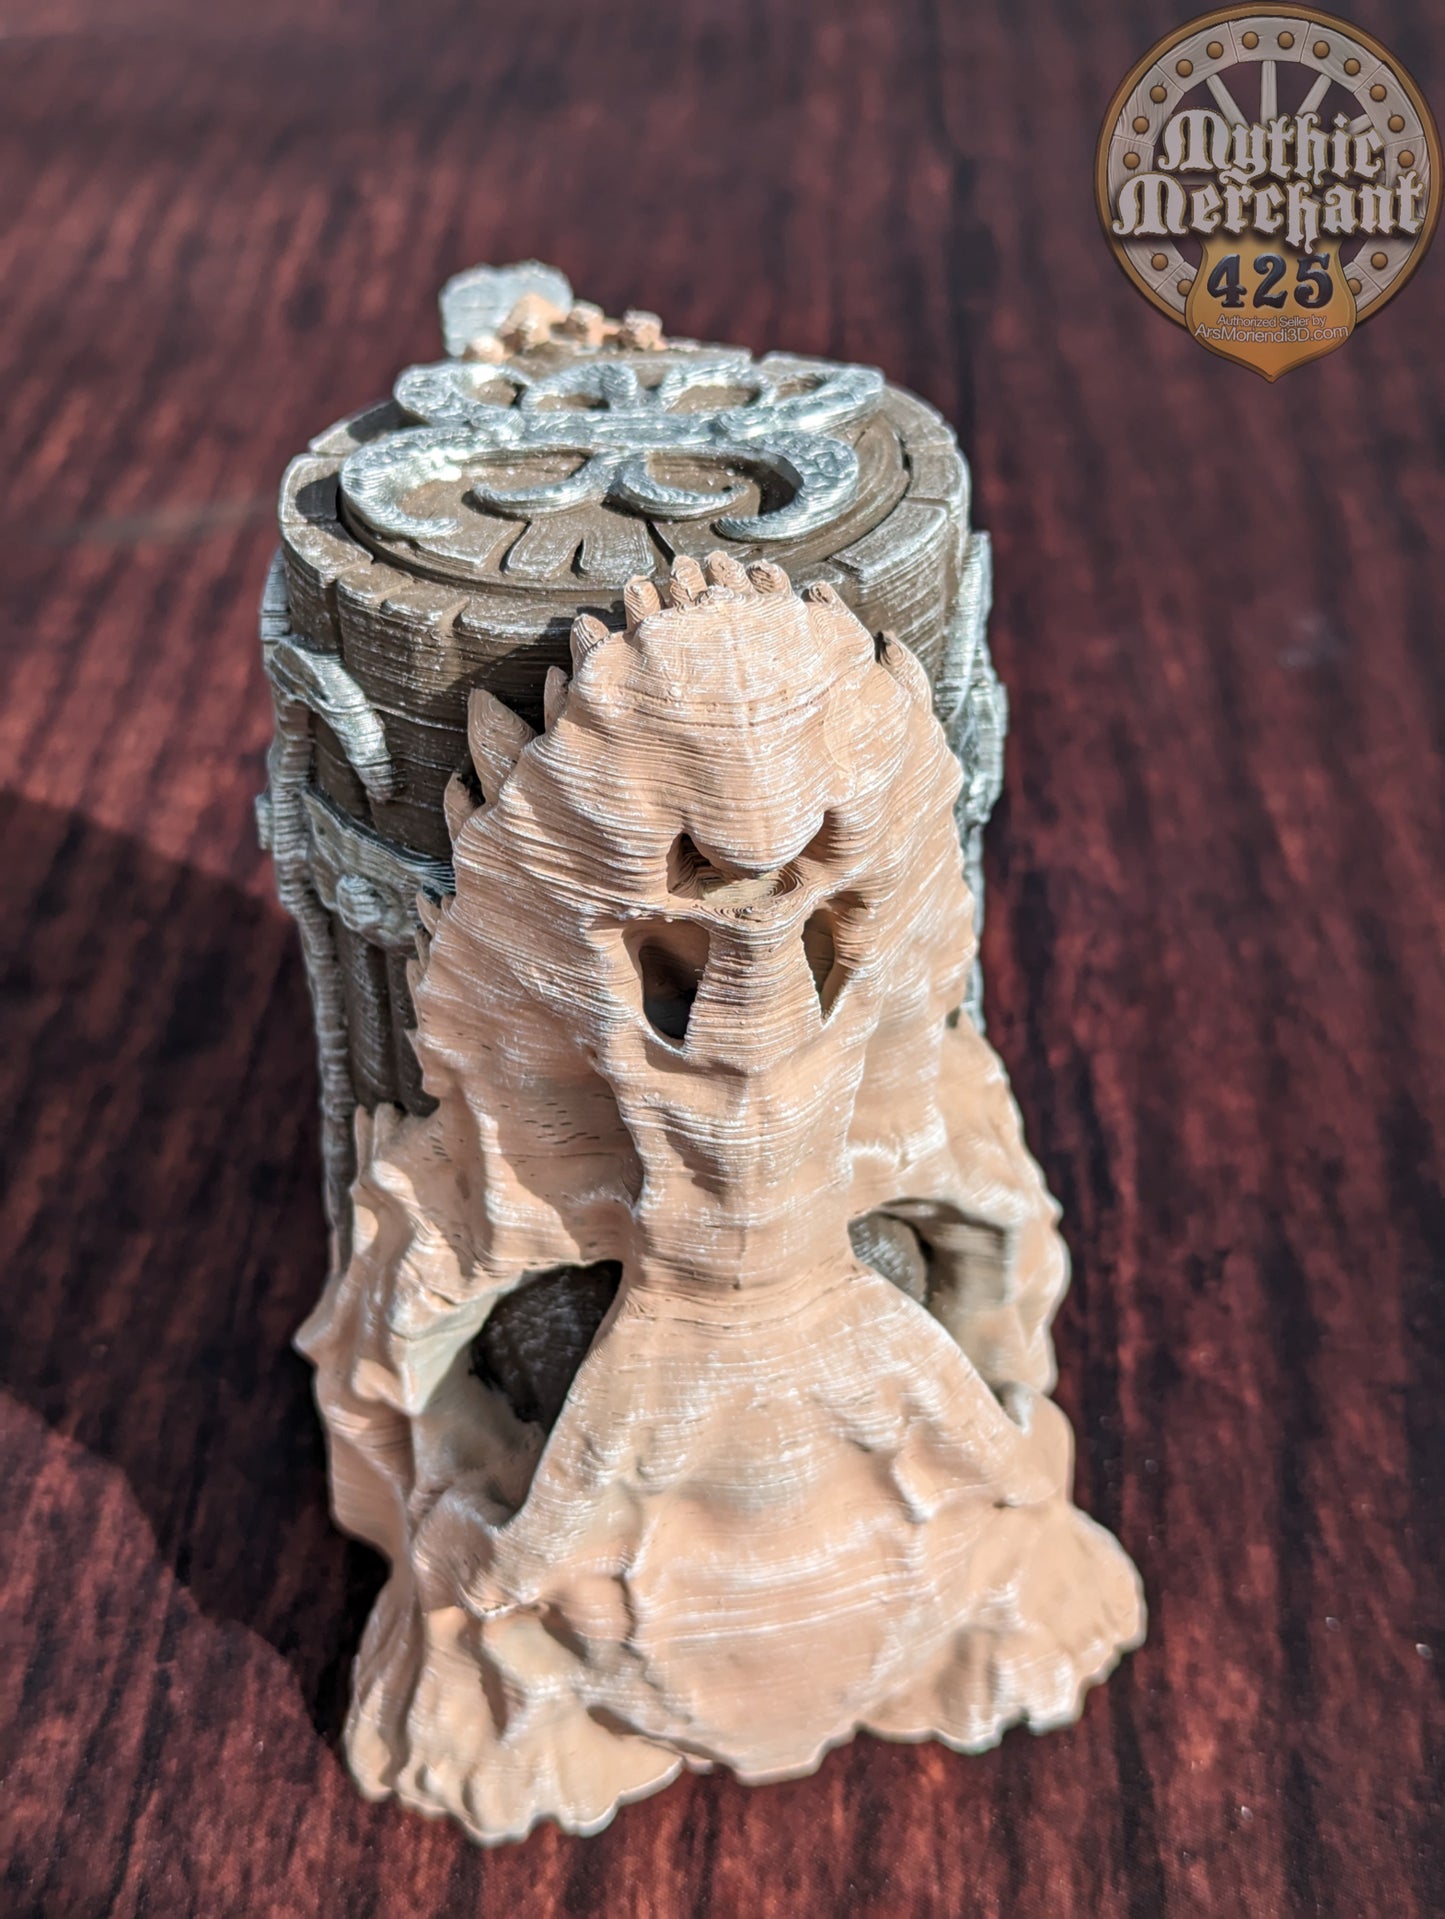 Dragon Skull 3D Printed Mythic Mug Stein | Tabletop RPG Gaming Cosplay - Dungeons and Dragon DnD D&D Wargaming | Drink Koozie